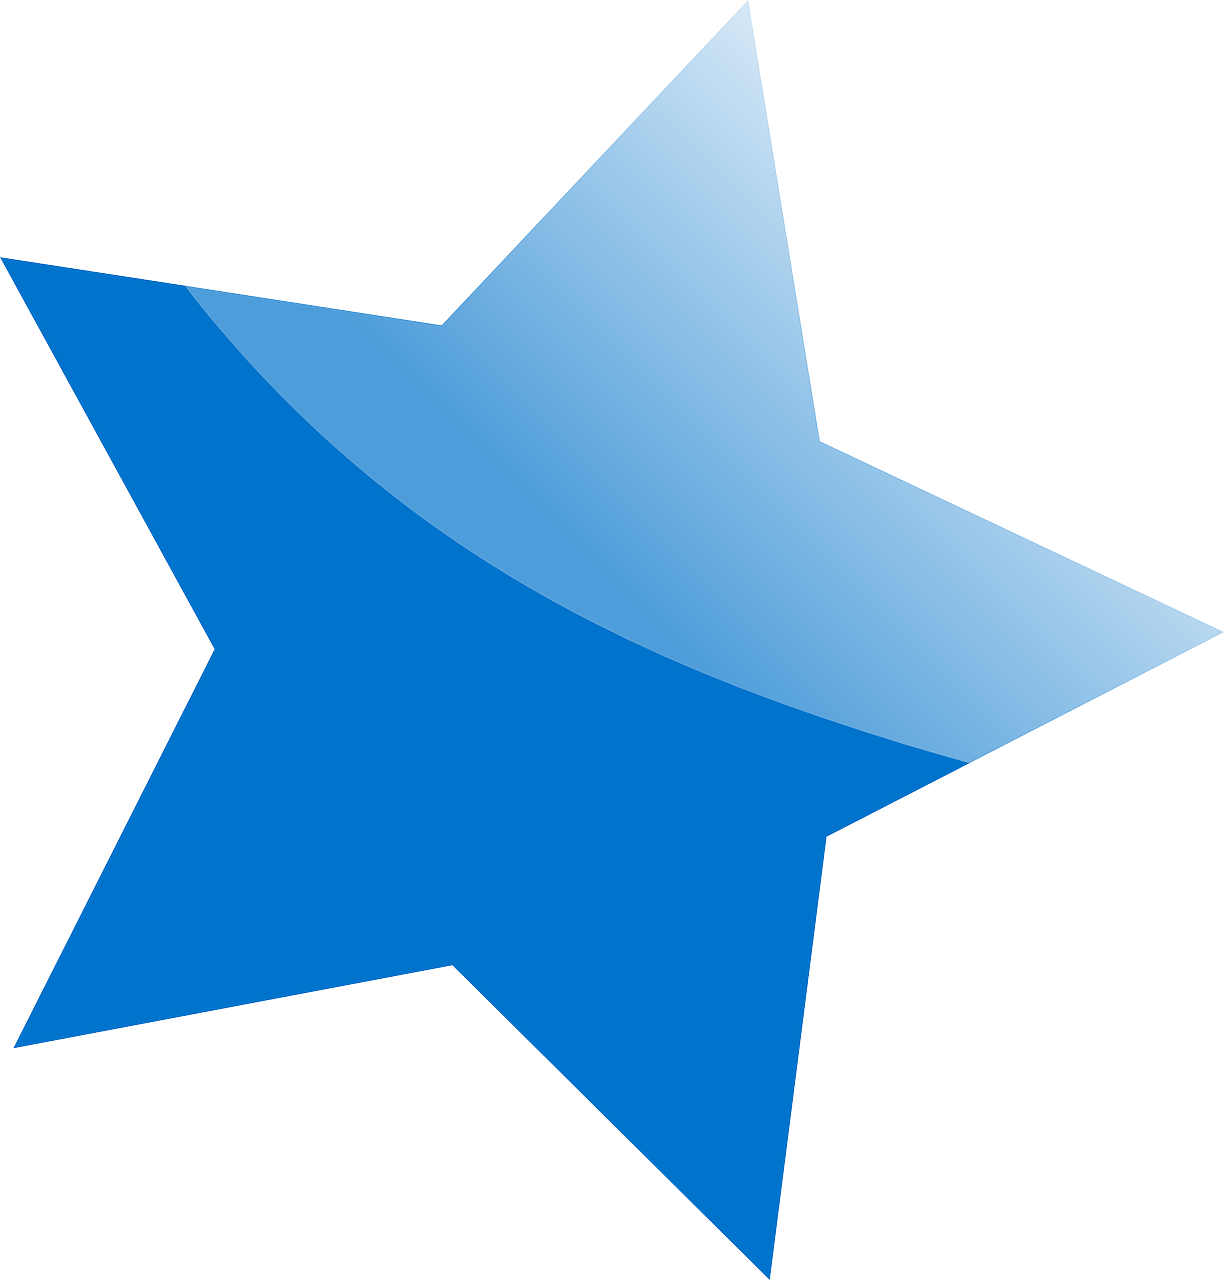 Download free photo of Star,blue,symbol,free vector graphics,free ...